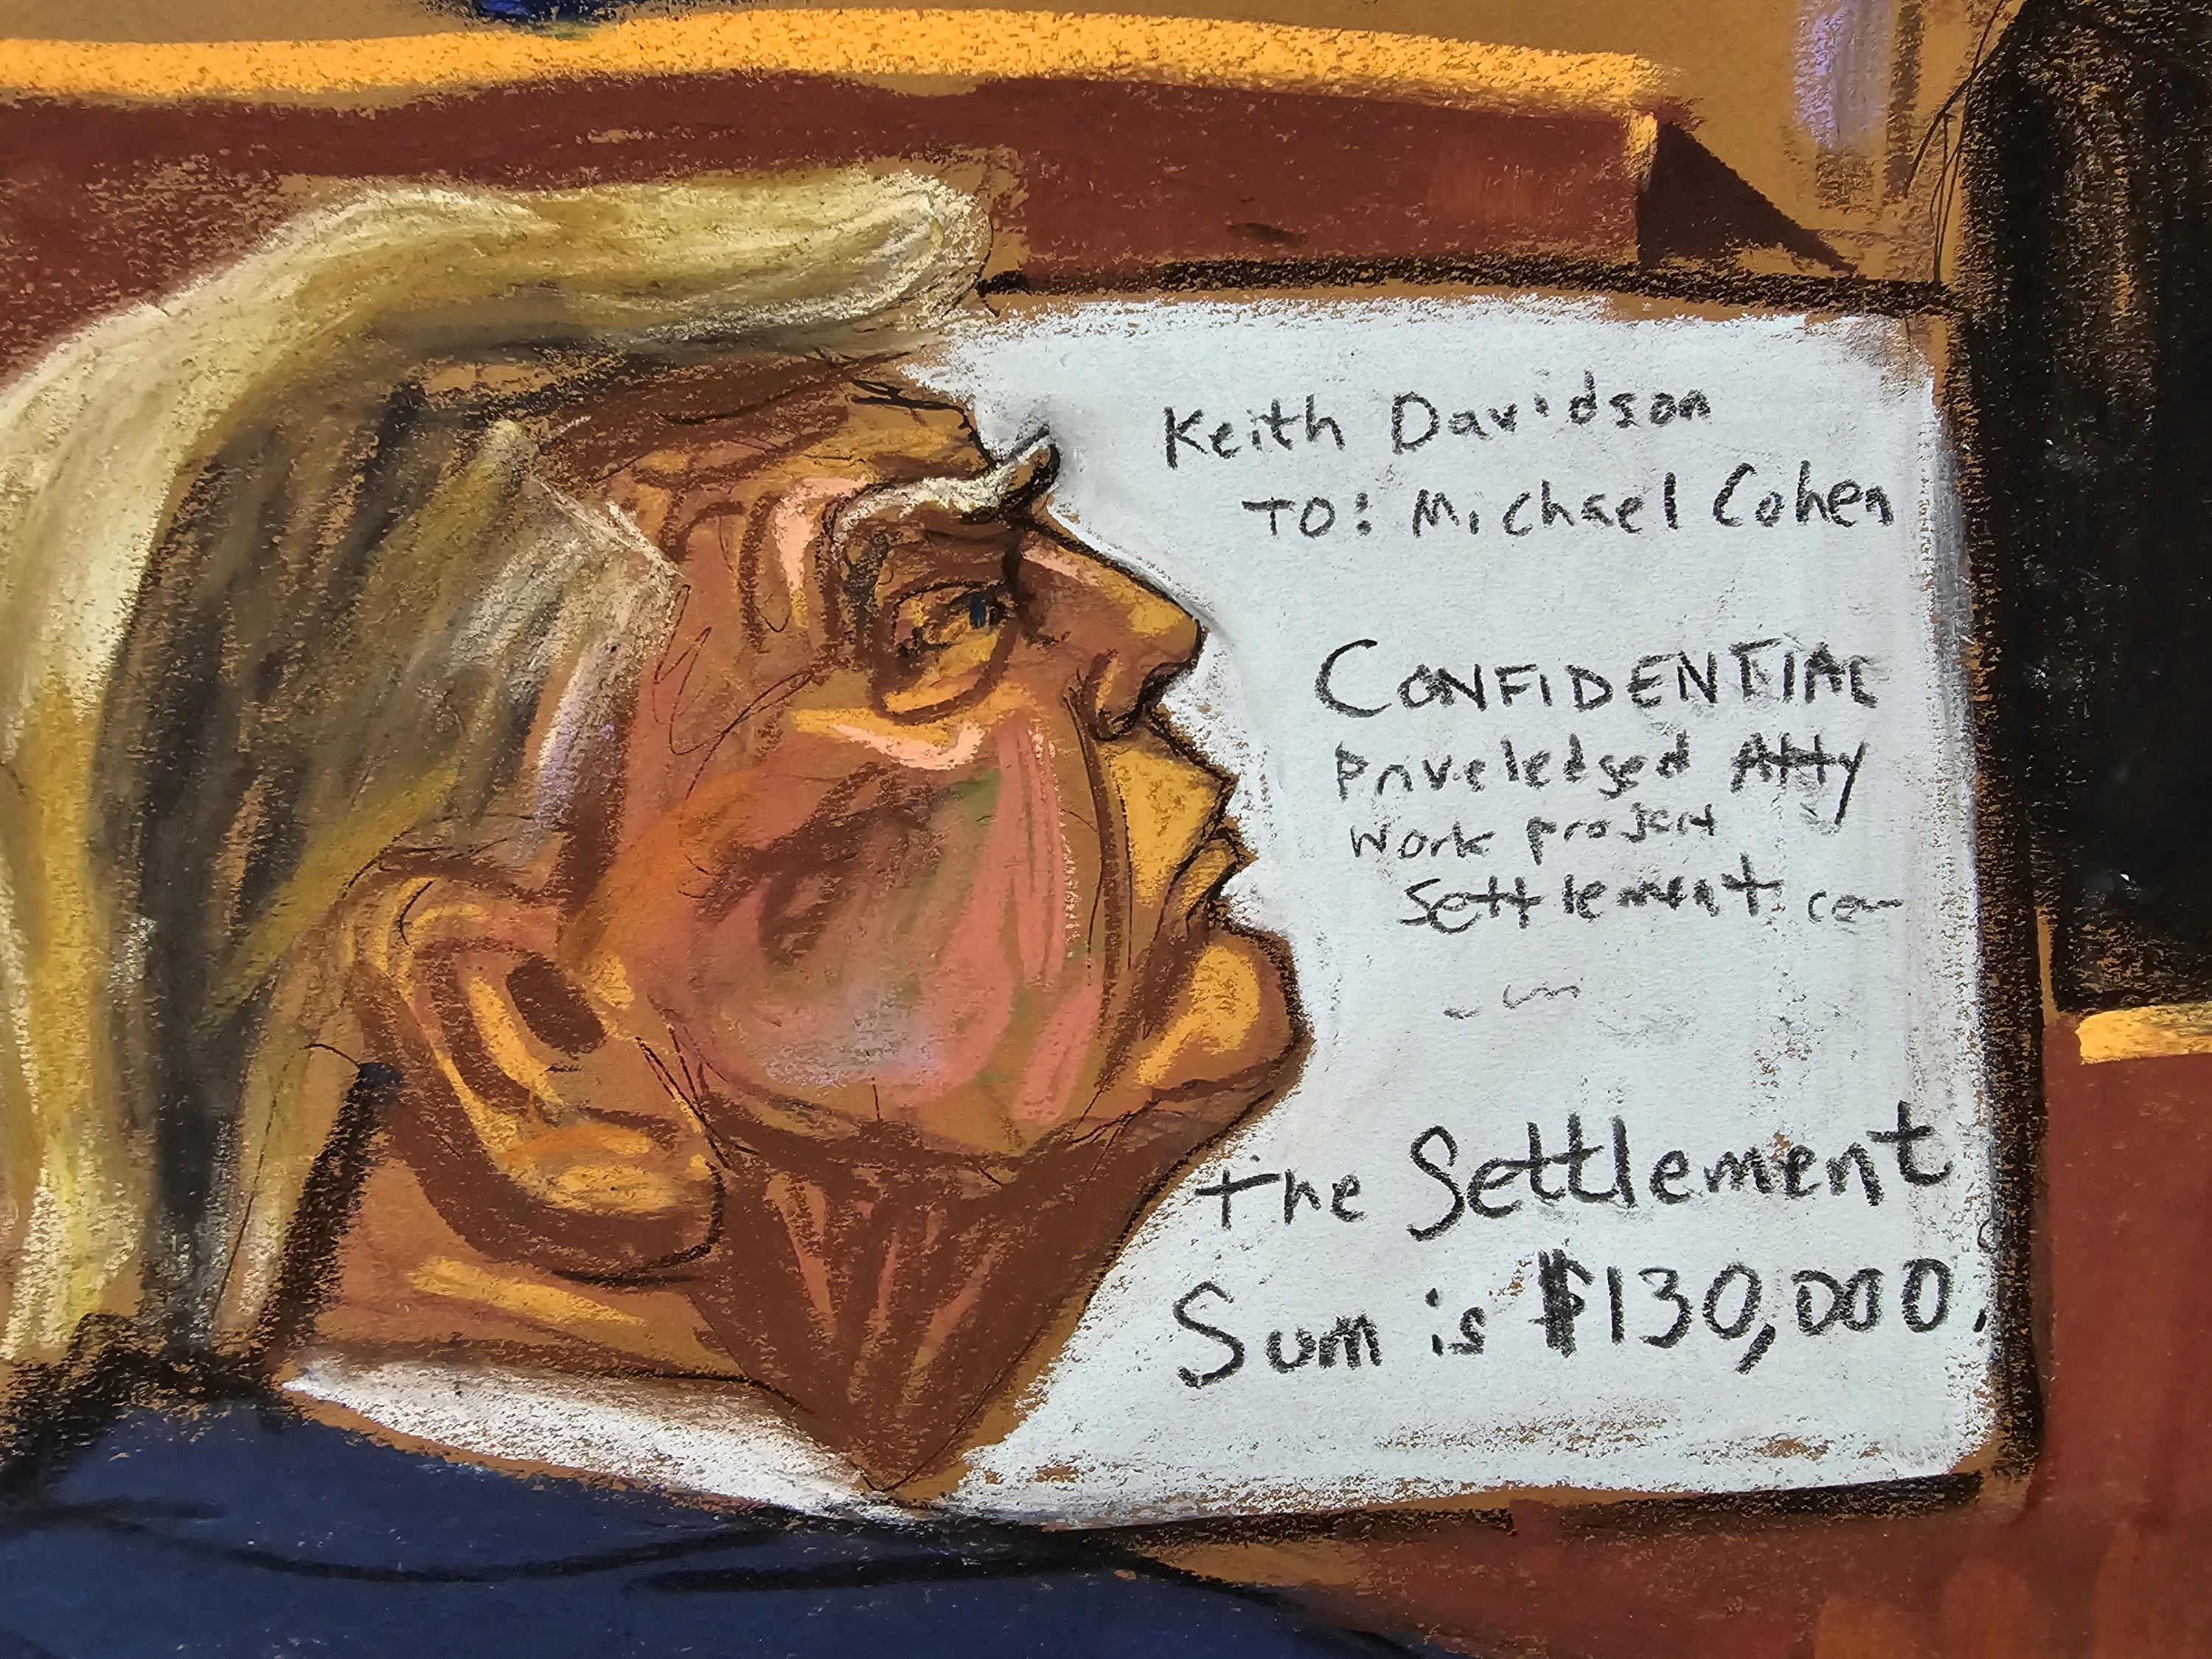 Donald Trump in a court sketch during his hush money trial